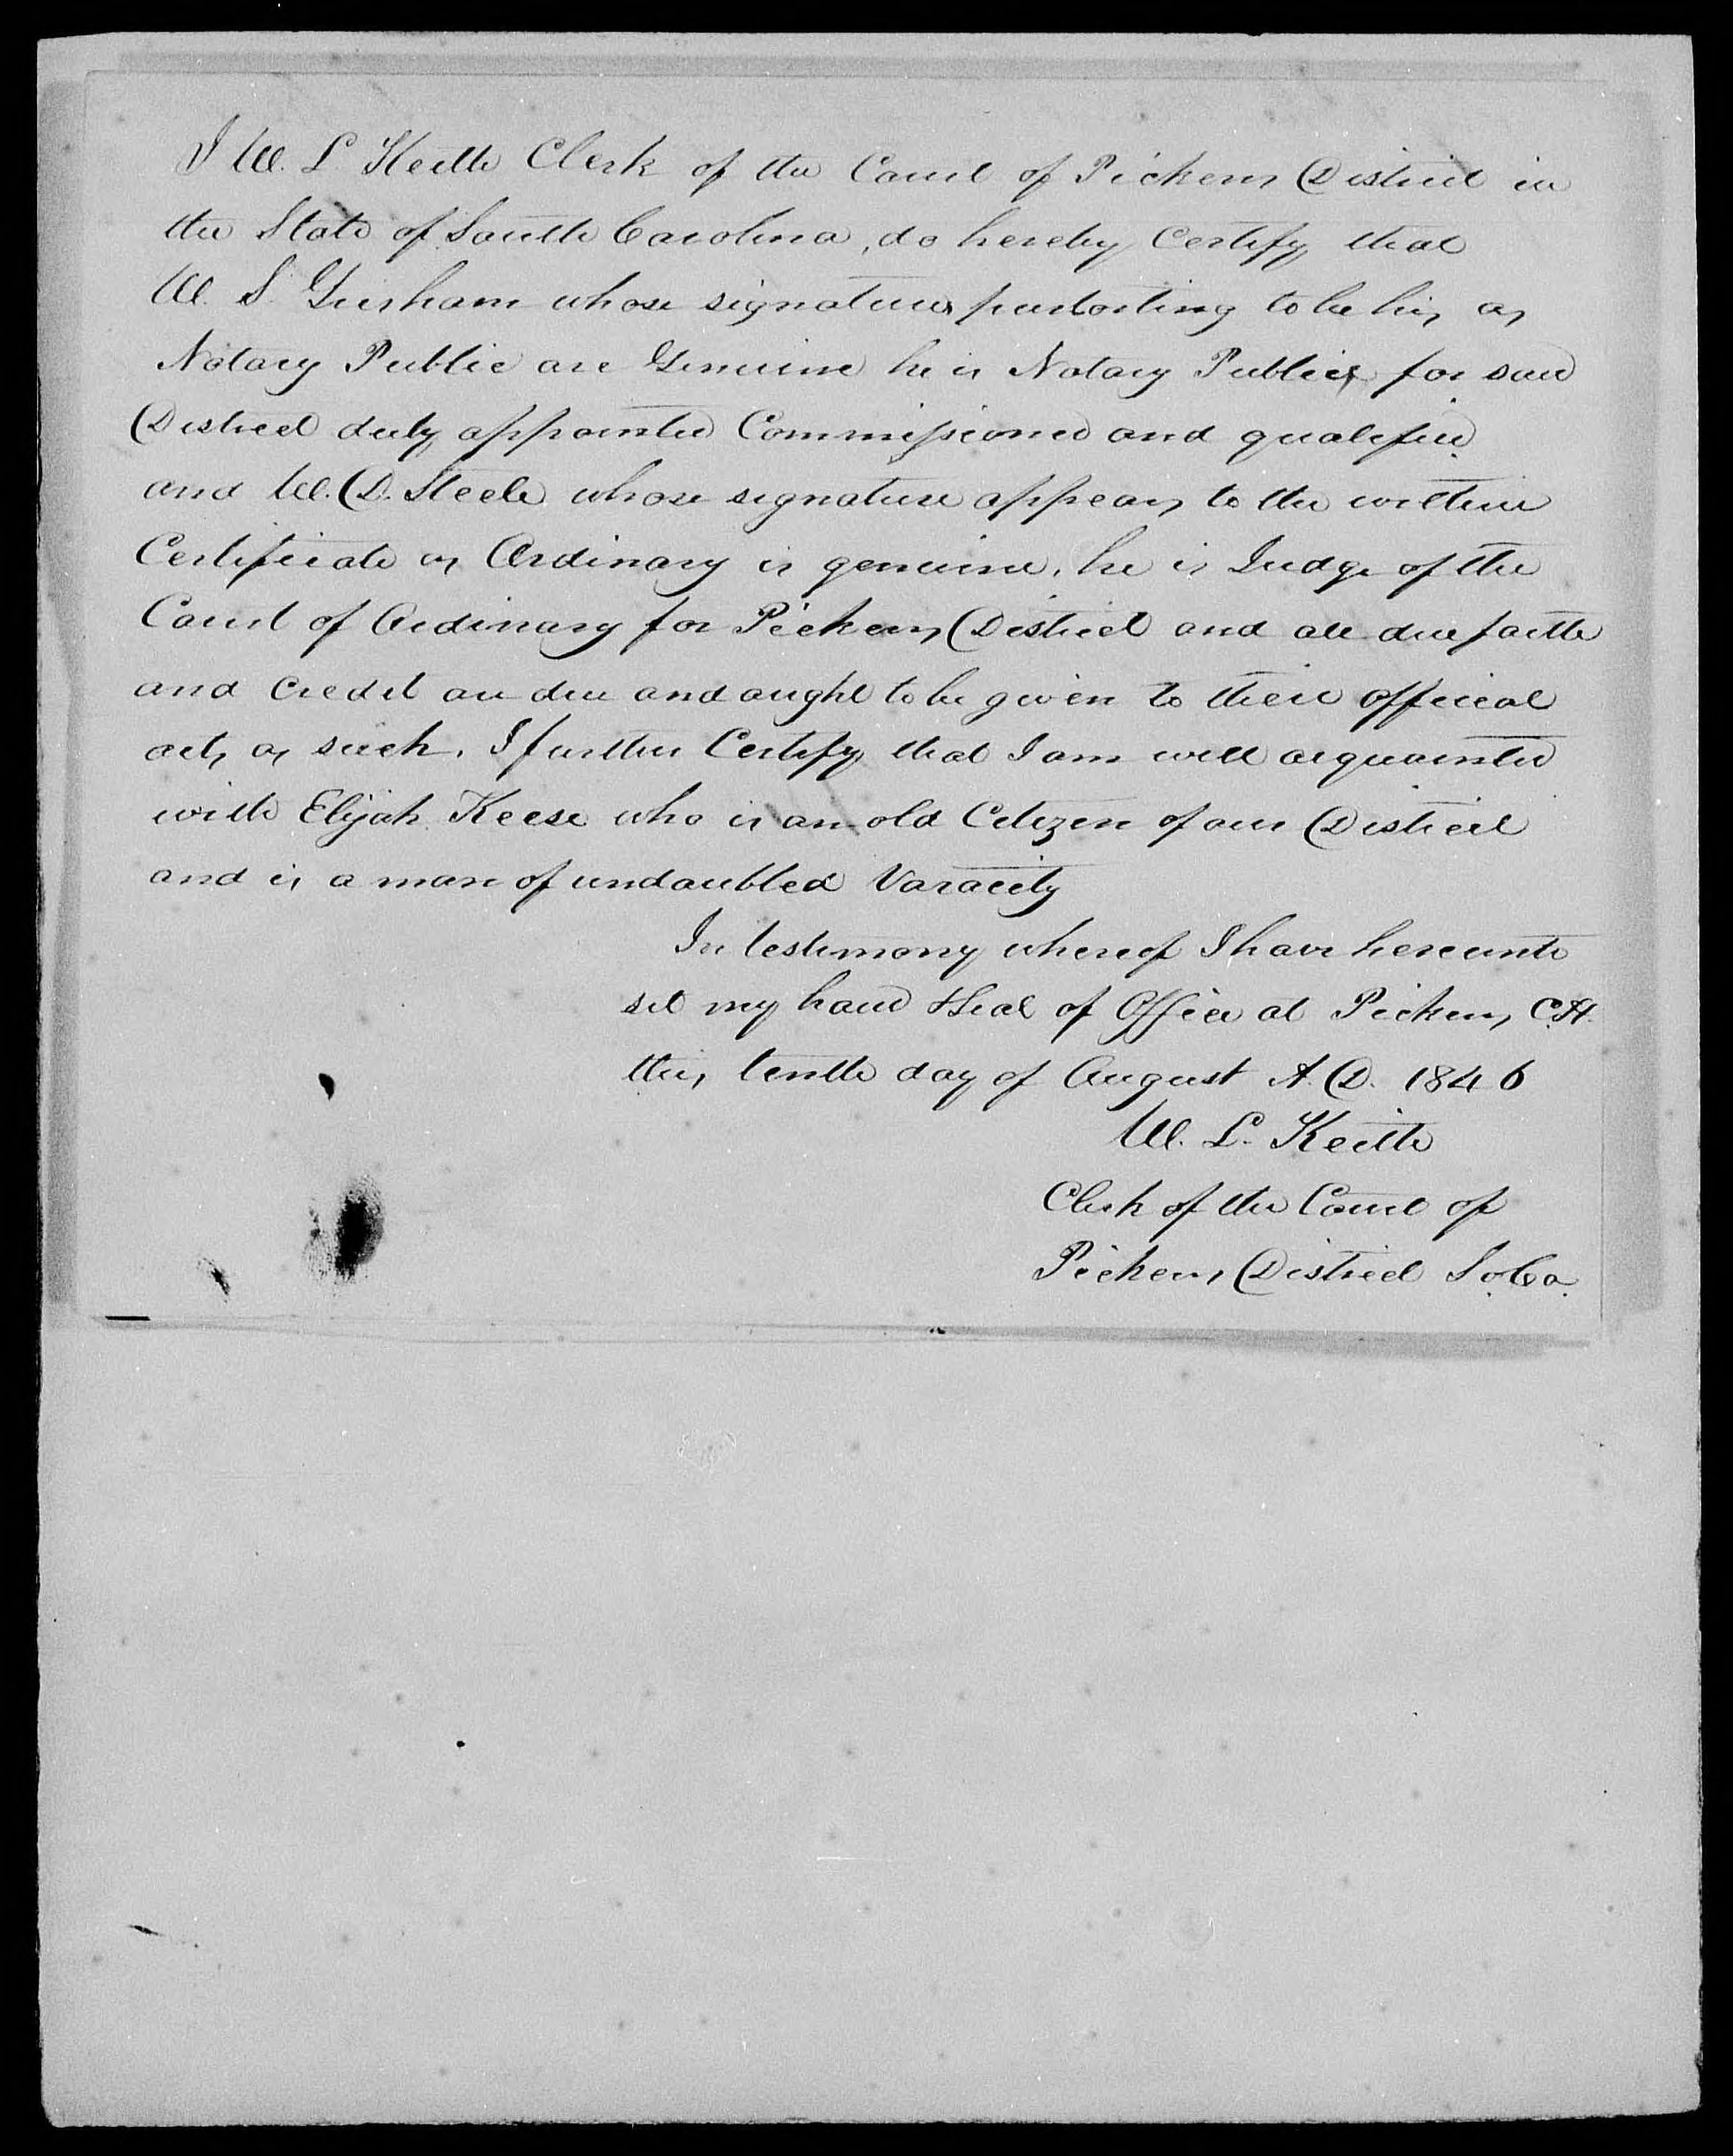 Application for a Veteran's Pension from William Guest, 10 March 1834, page 4